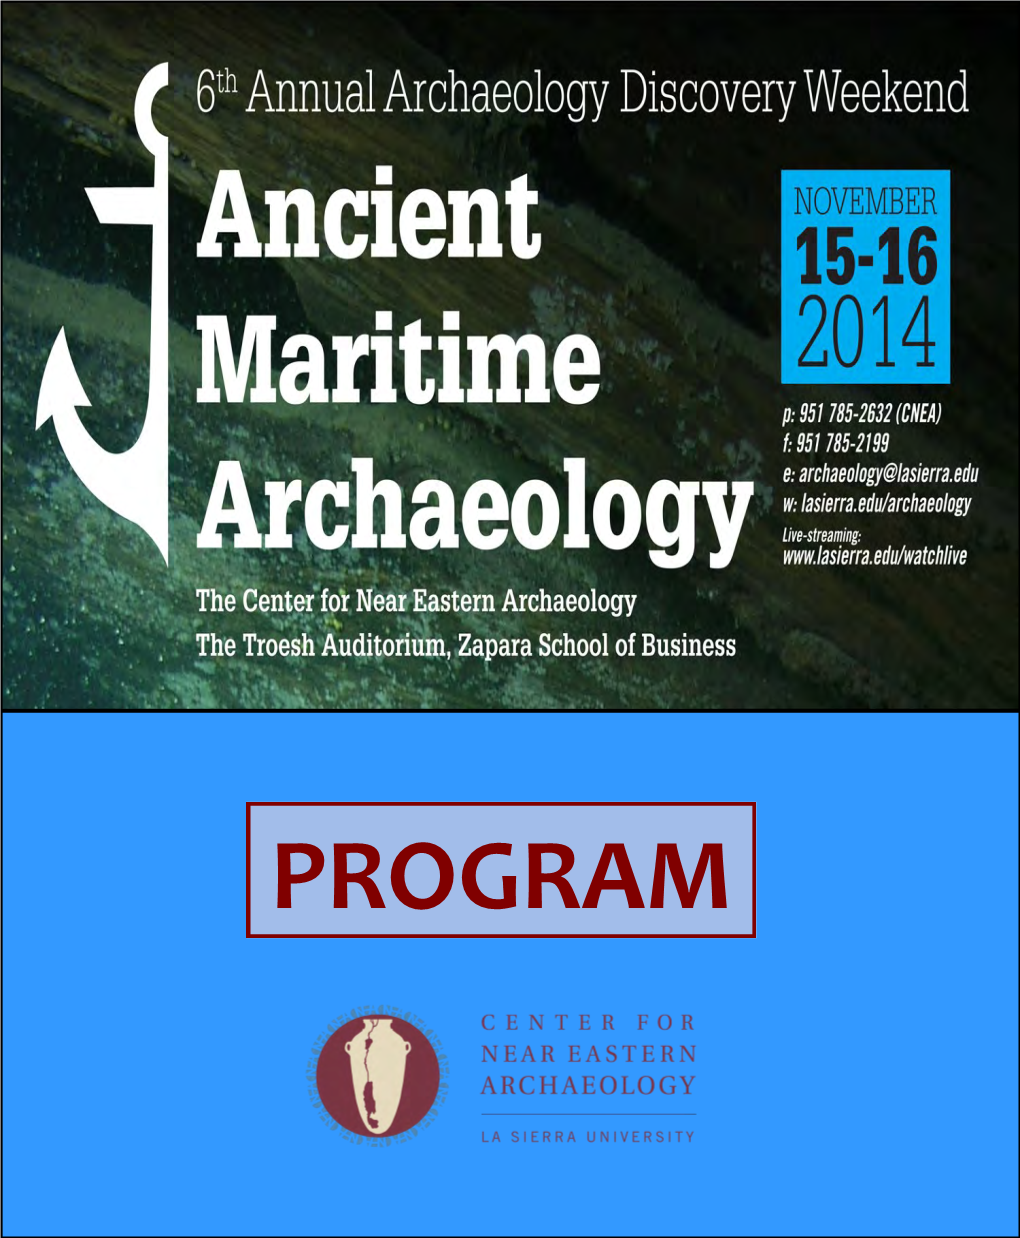 PROGRAM 2014 Archaeology Discovery Weekend Speakers/Presenters (Arranged Alphabetically) Dr